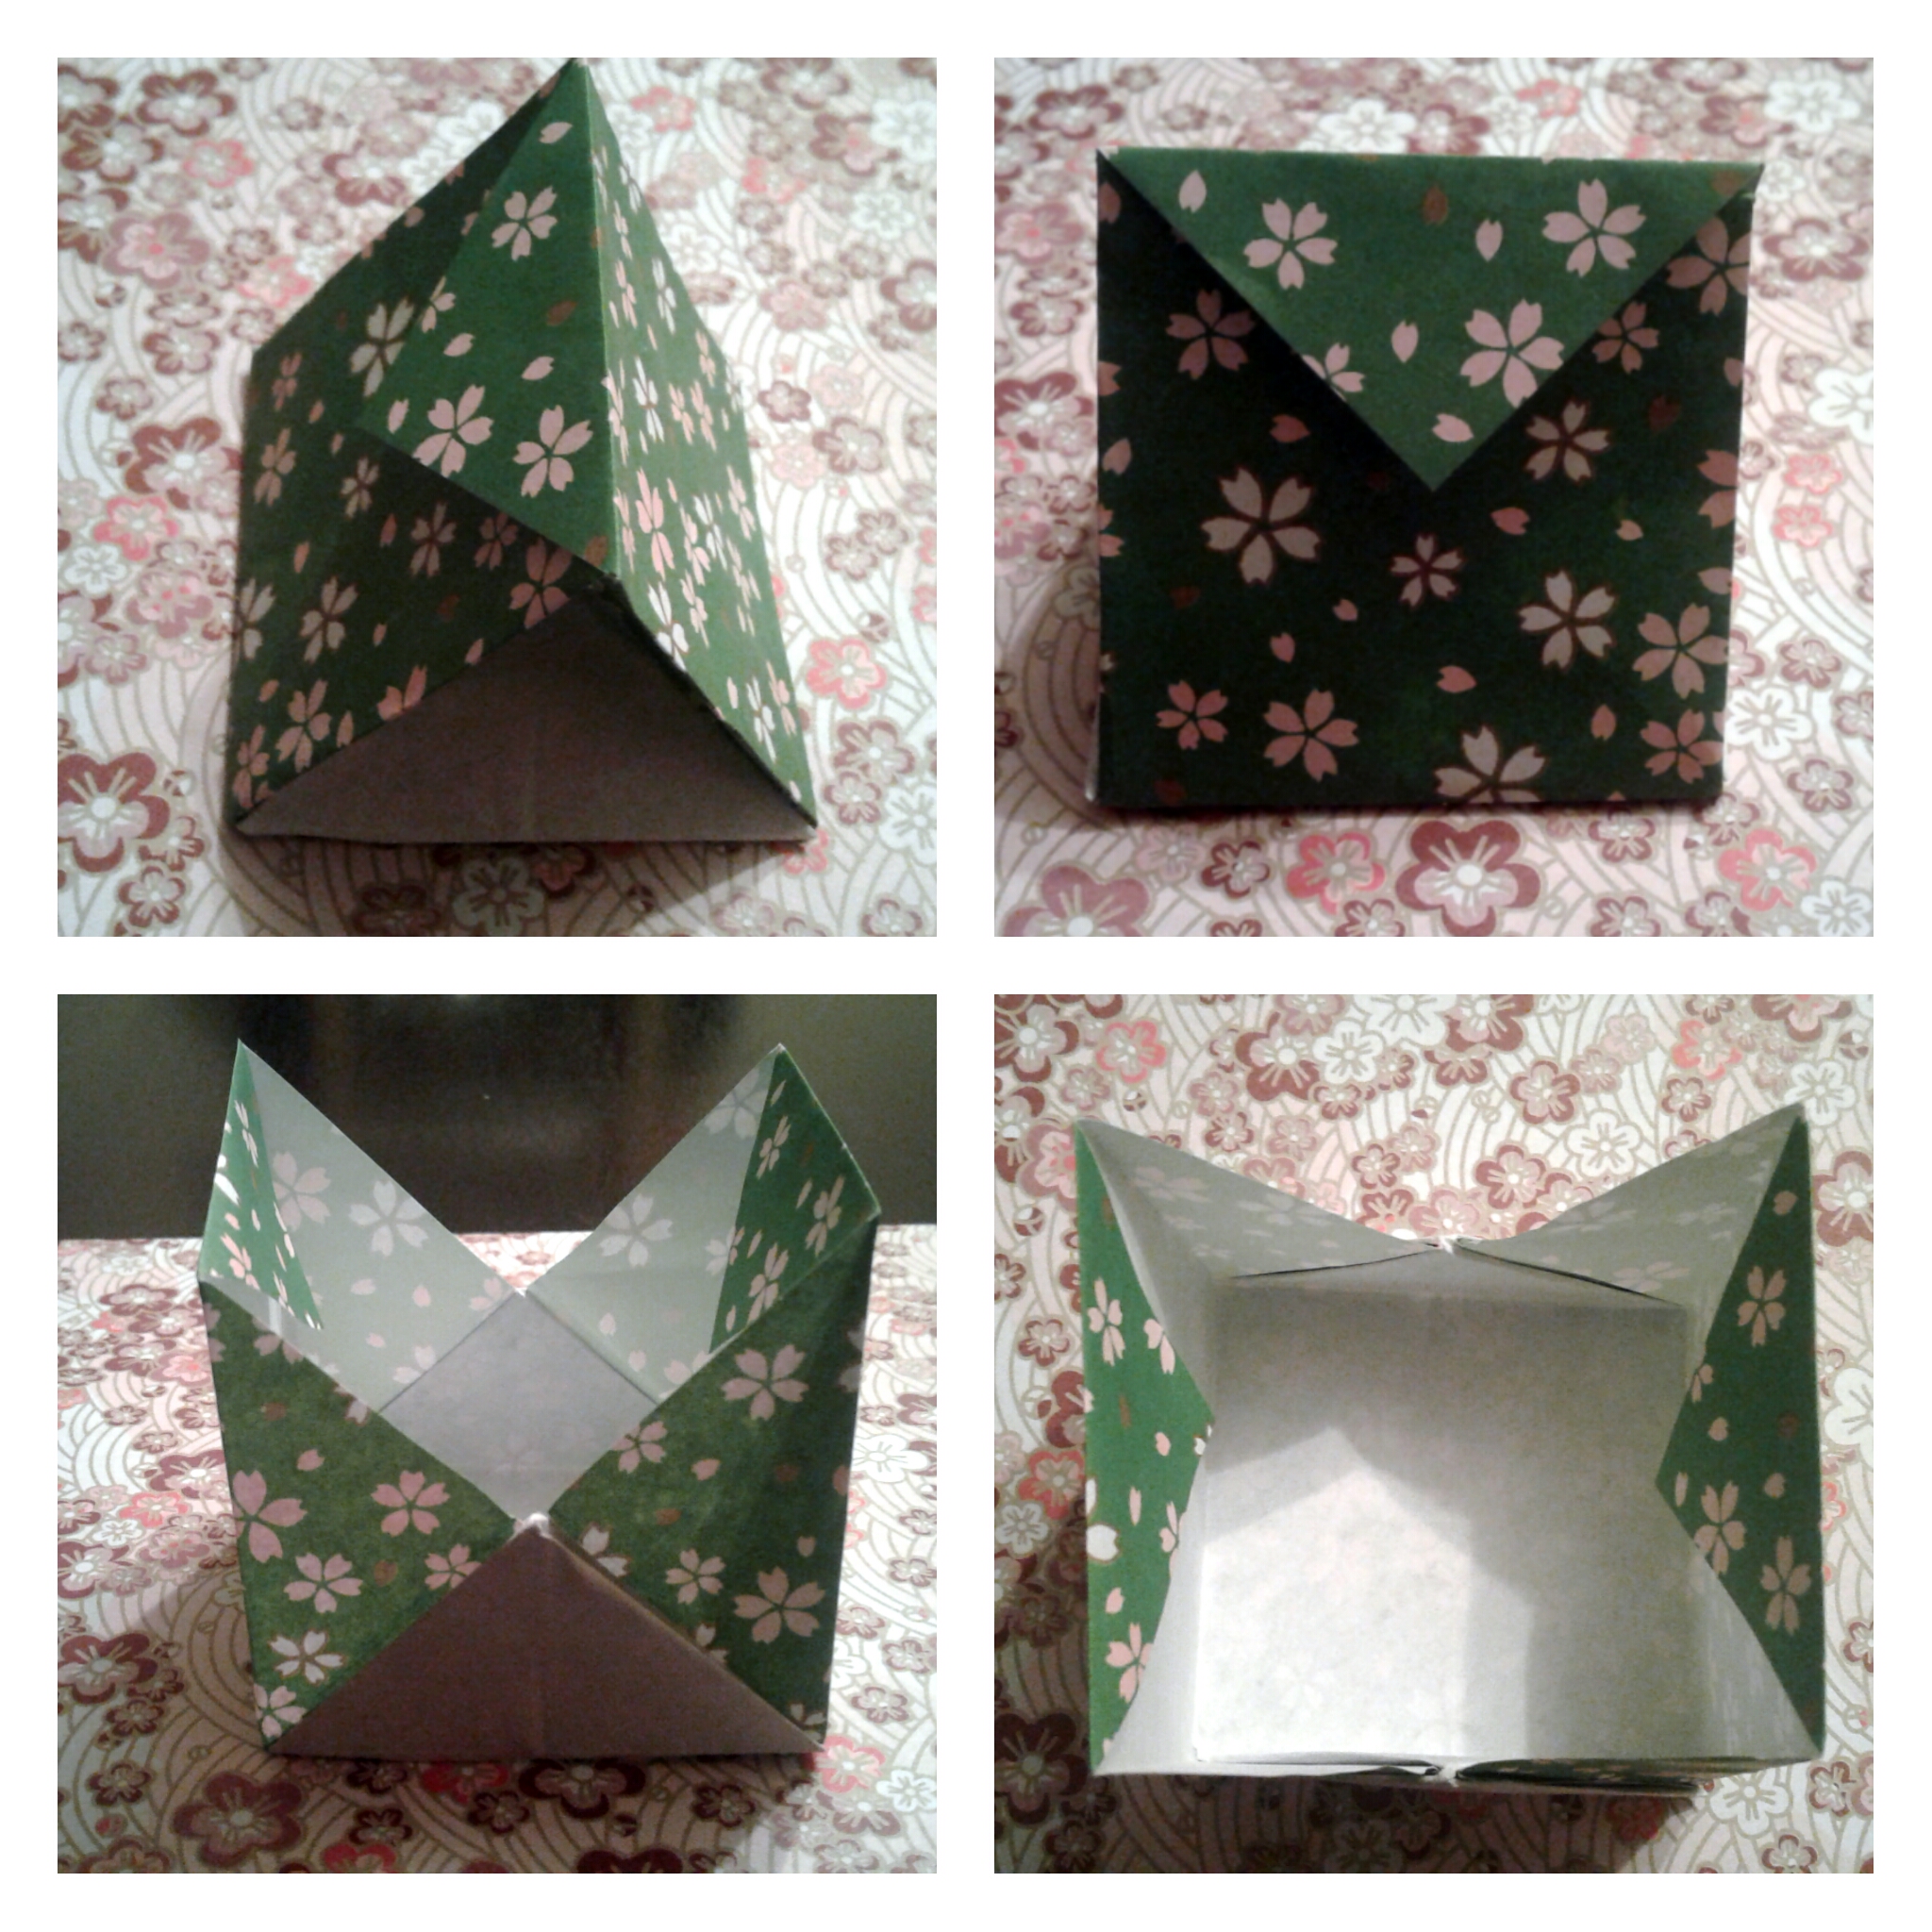 Bag of gifts from the paper - OrigamiArt.Us